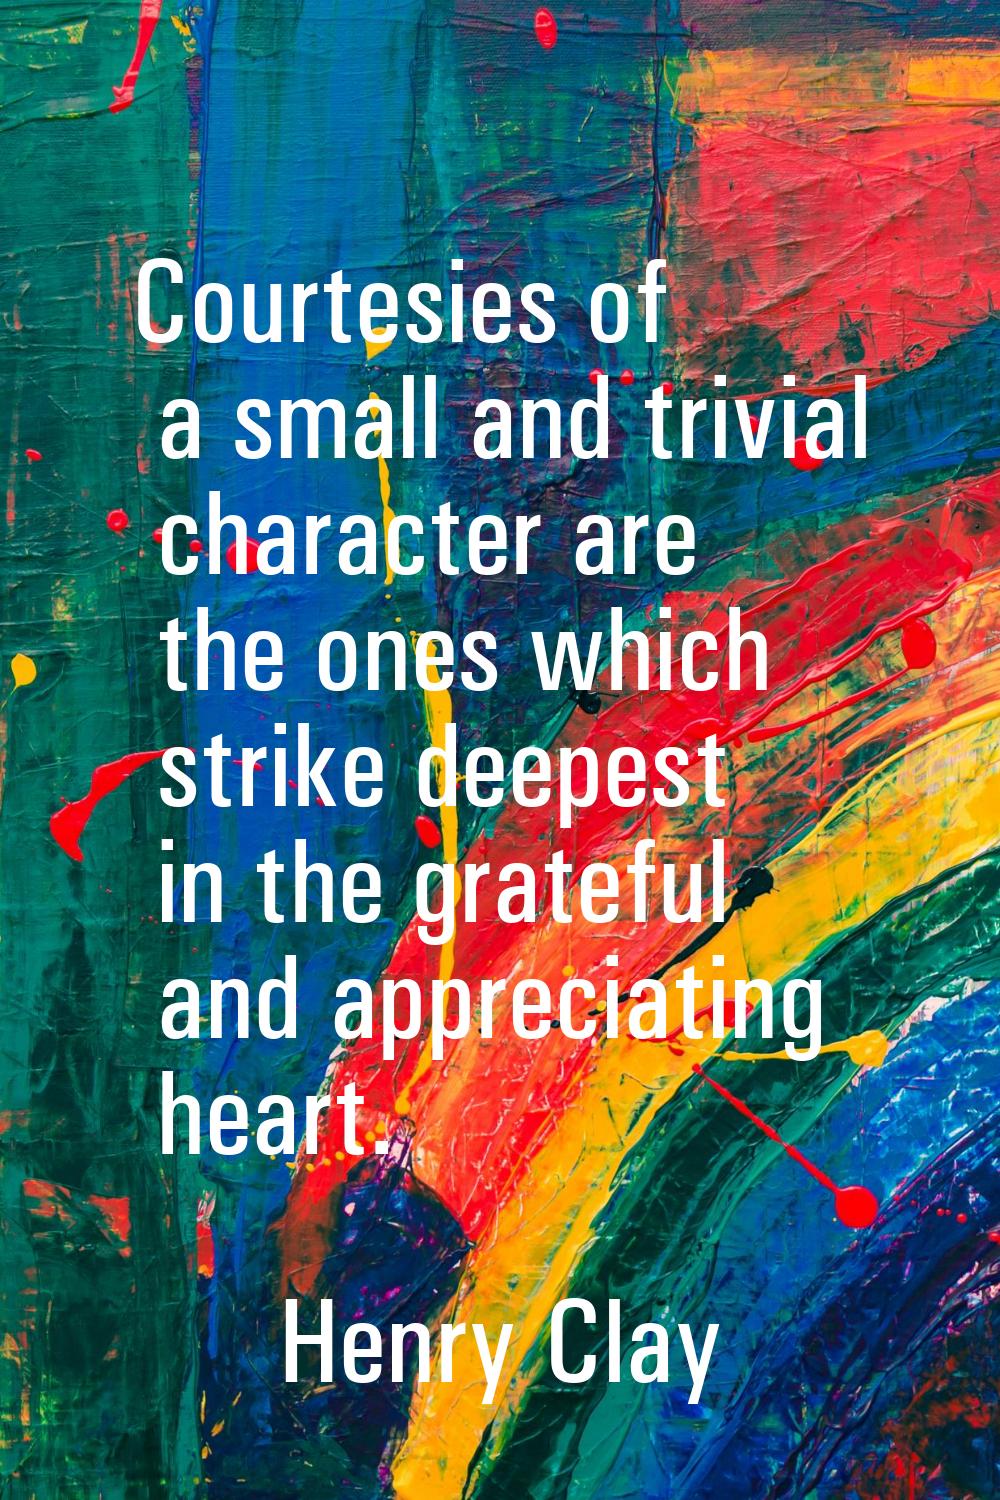 Courtesies of a small and trivial character are the ones which strike deepest in the grateful and a